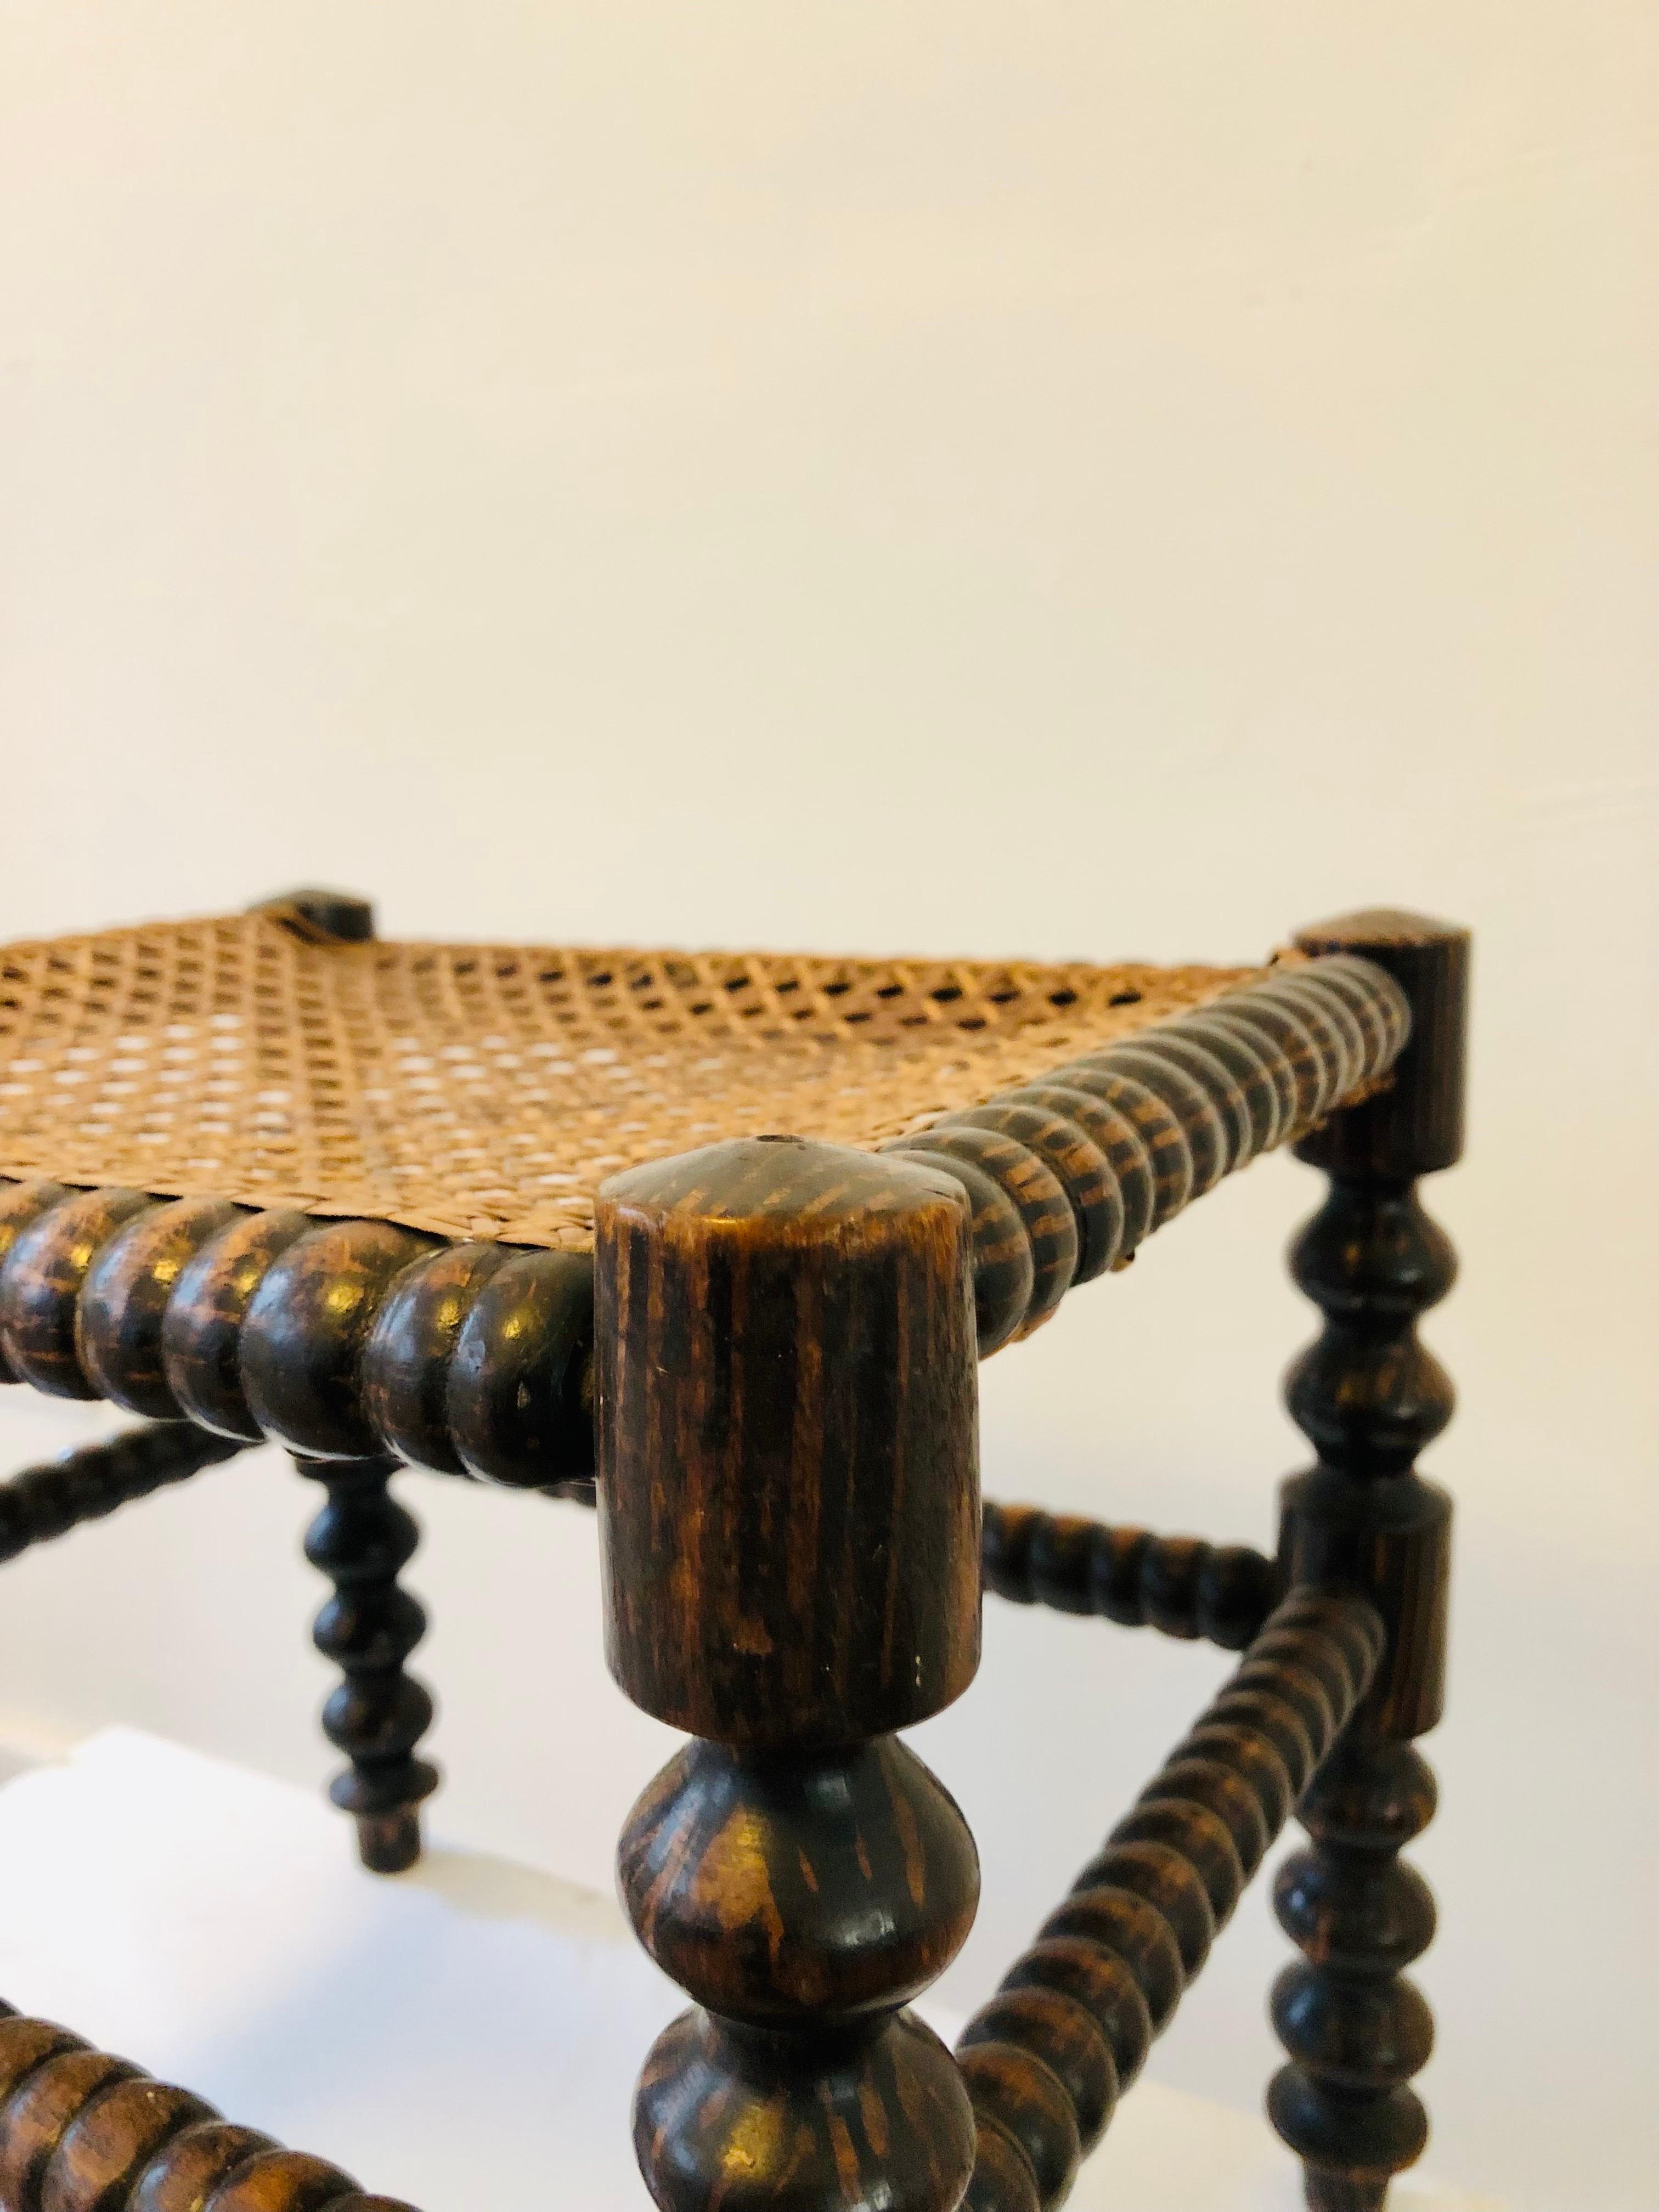 French A footstool from the early 20th century - turned wood and caning - France. For Sale